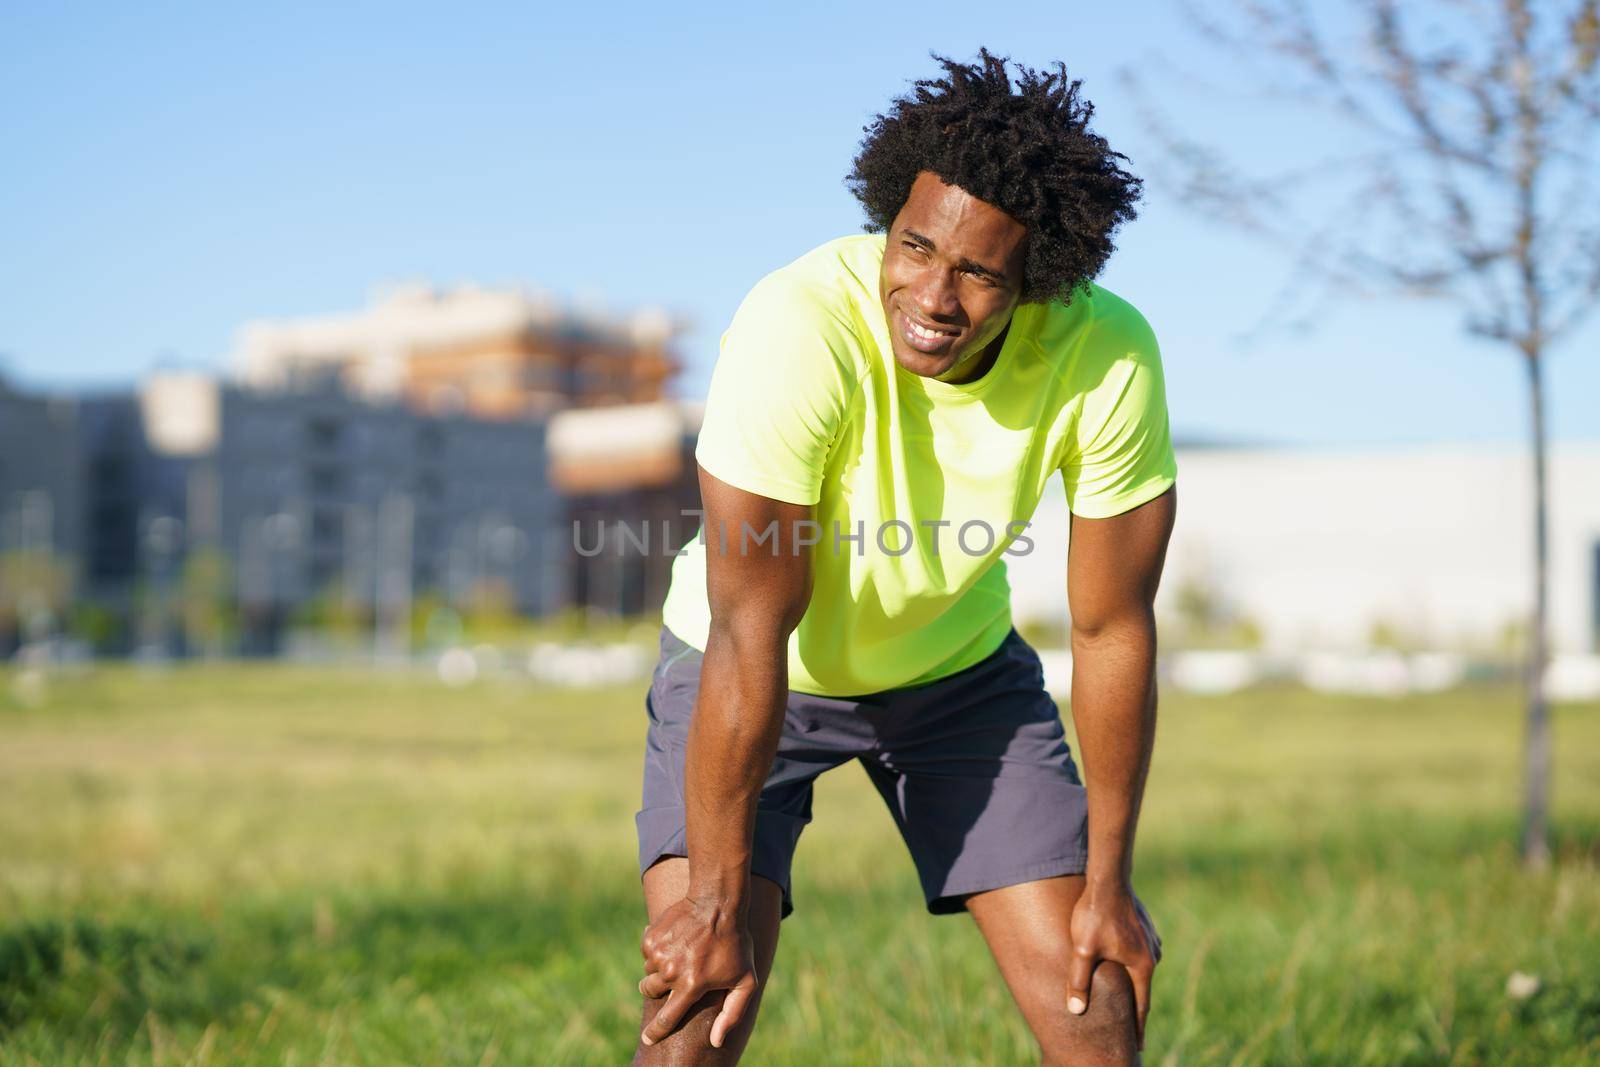 Black man with afro hair exhausted after exercising. Man taking a break after hard workout.